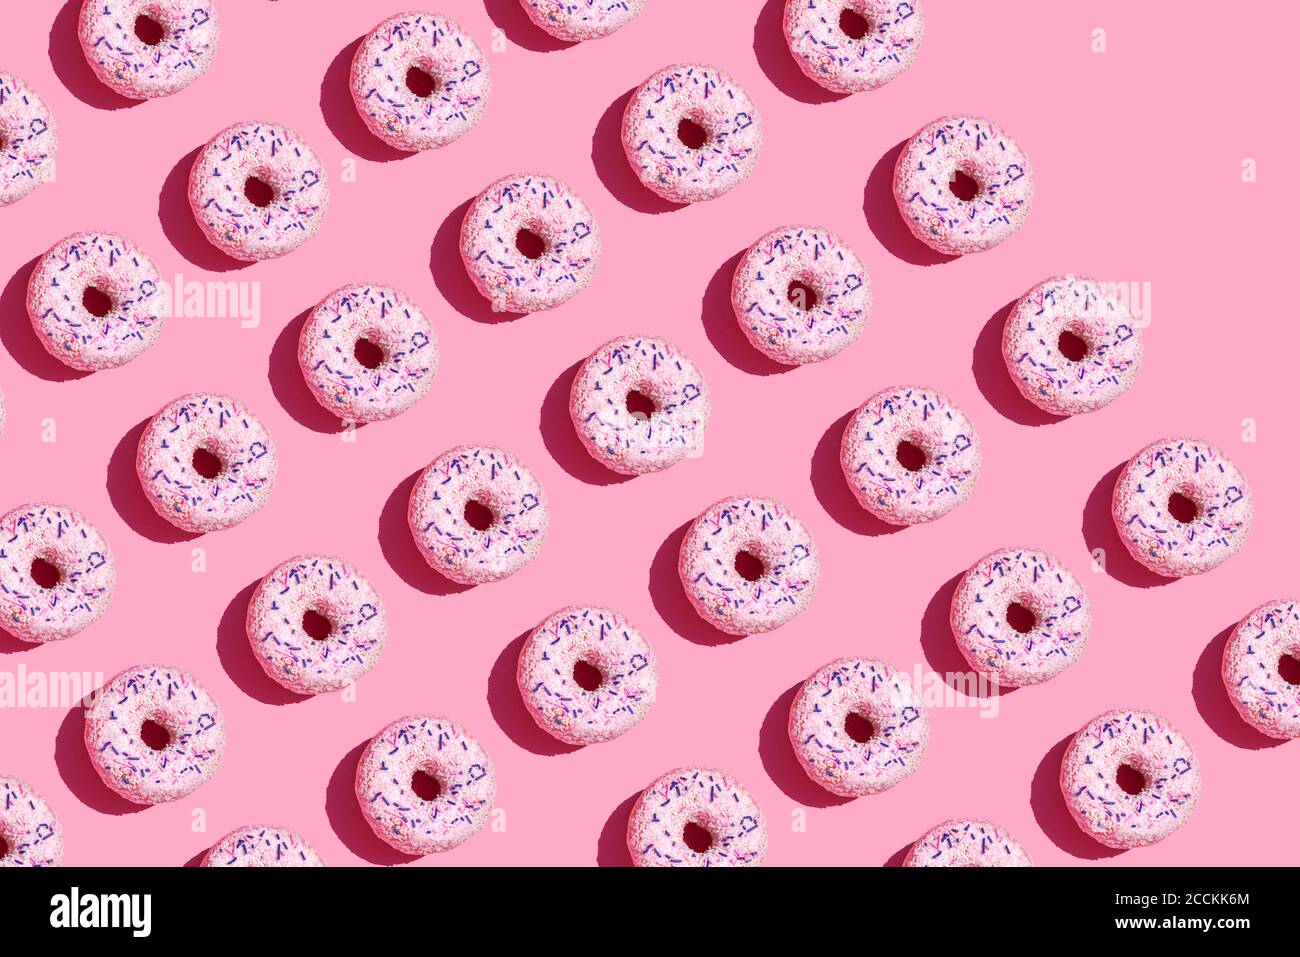 Pattern of sweet doughnuts against pink background Stock Photo